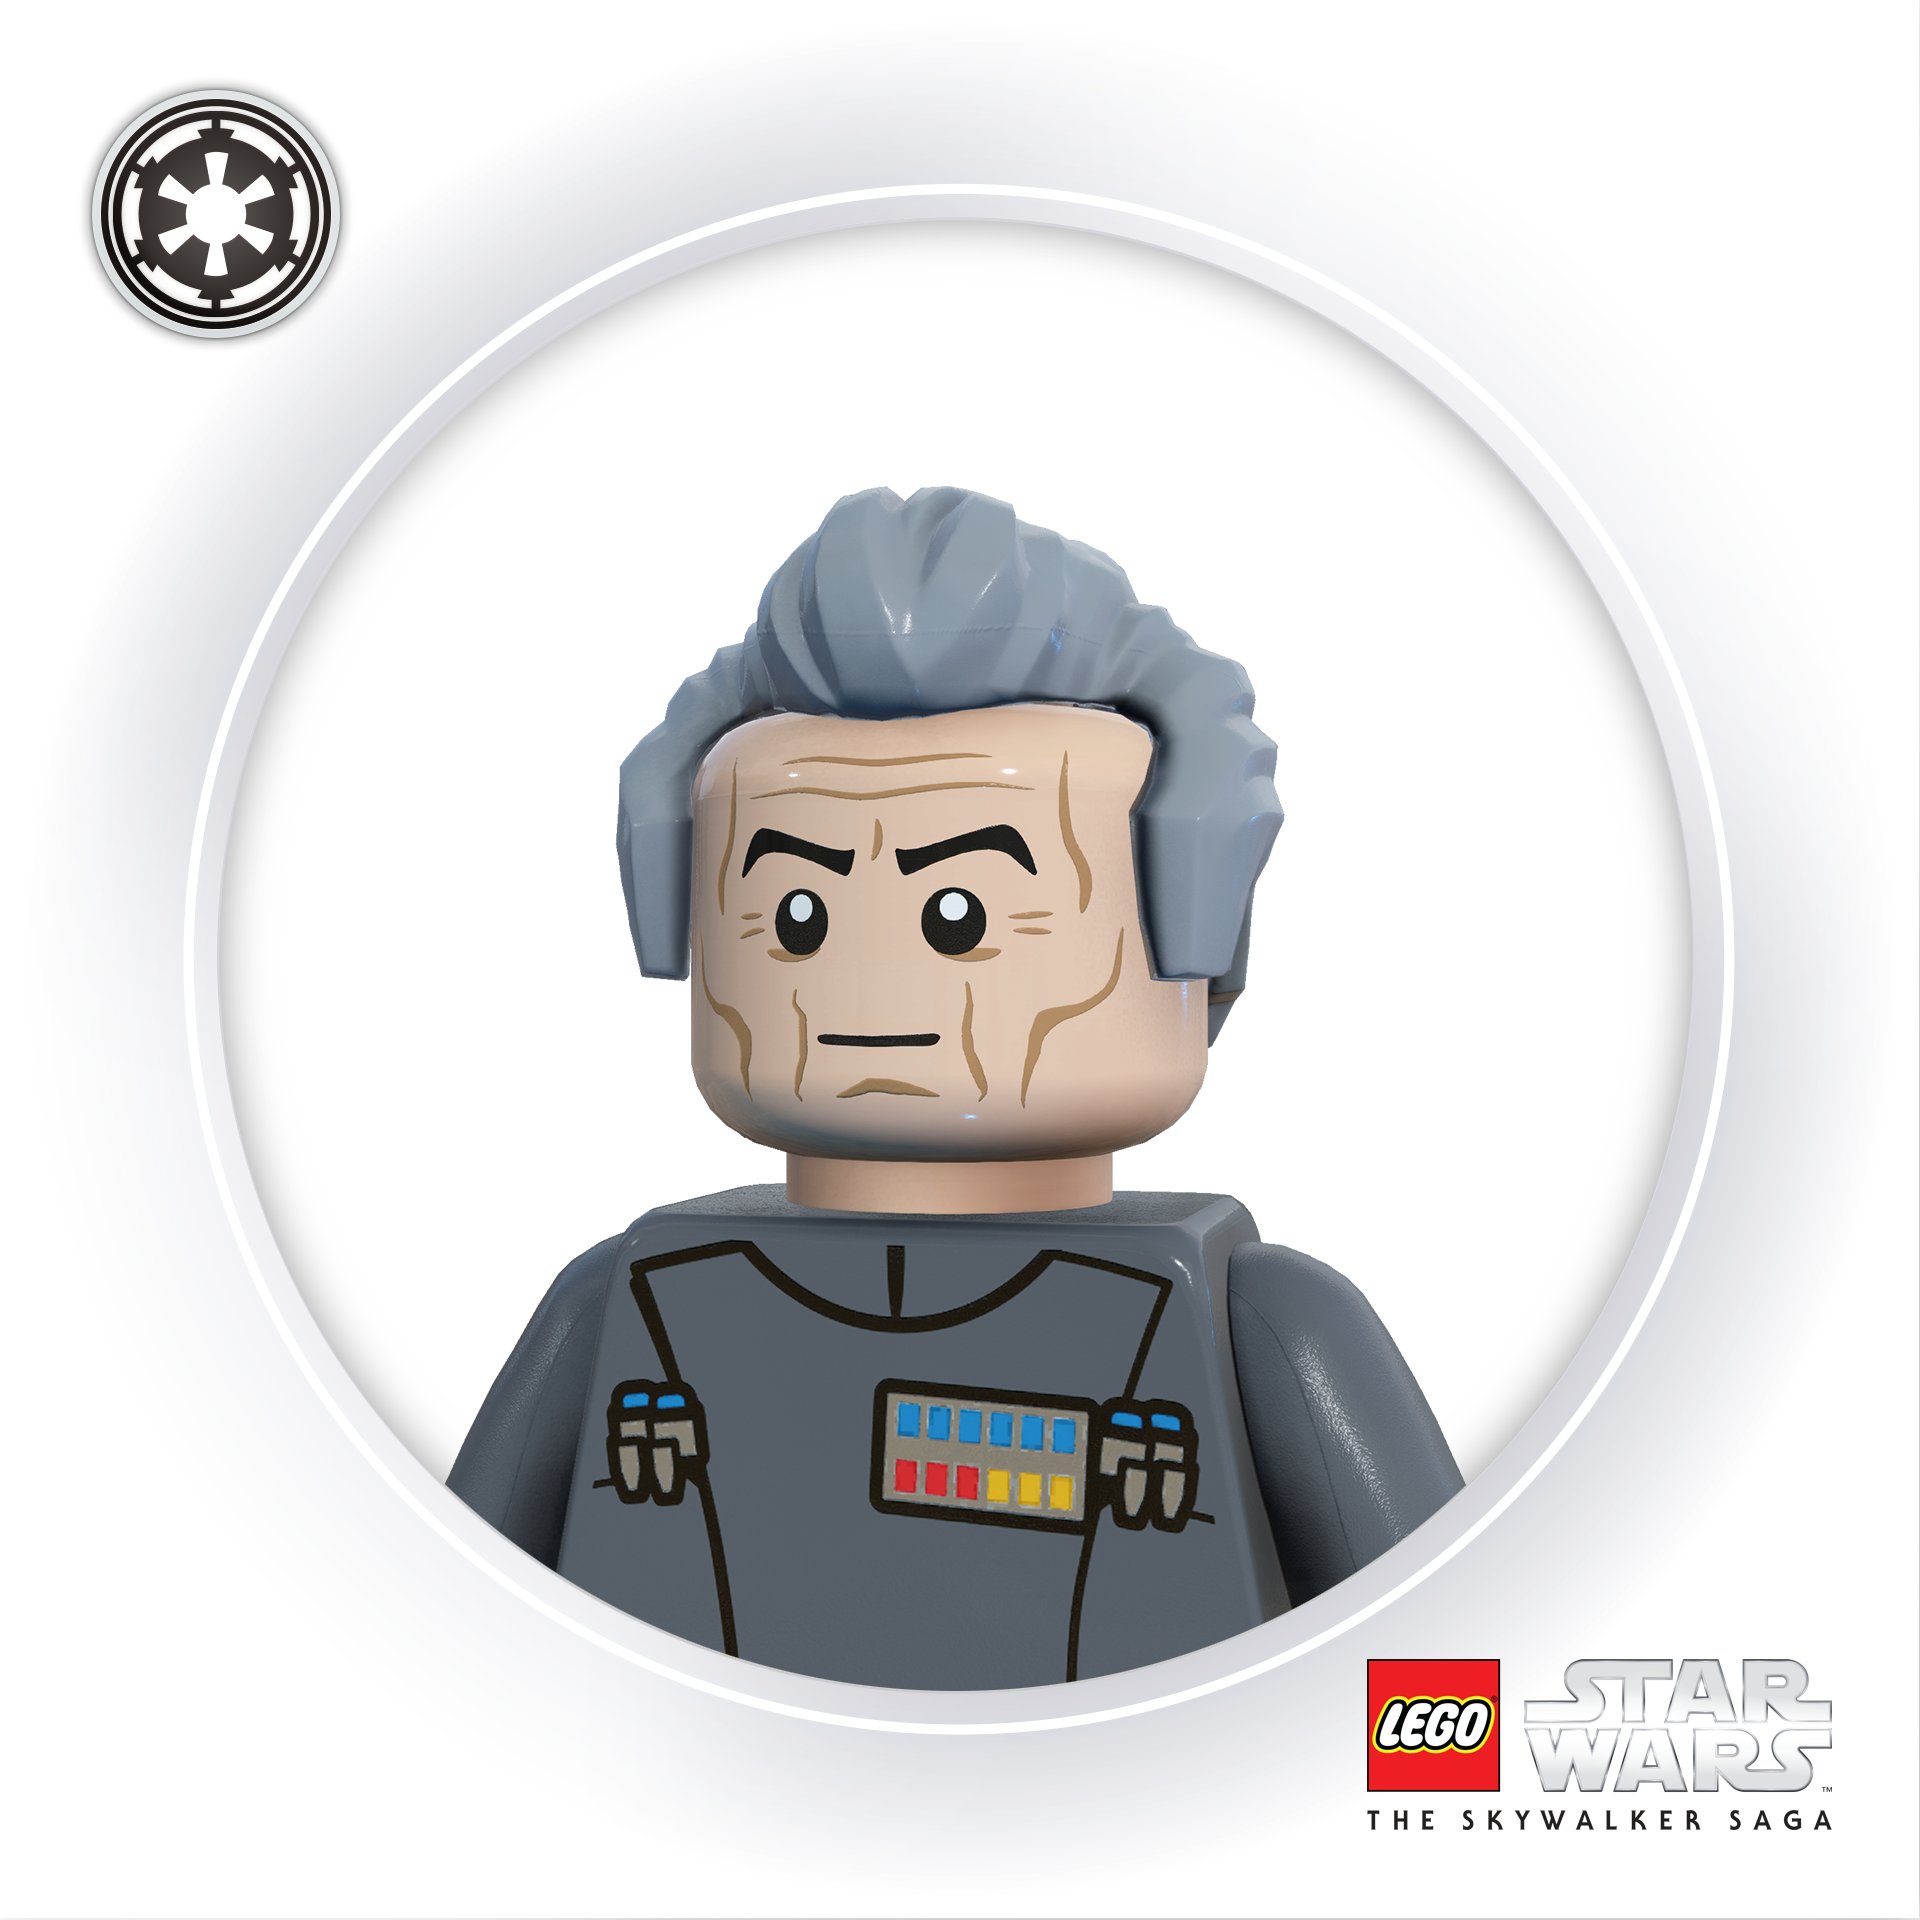 Lego Star Wars Game Feel The Power Of The Dark Side With This New Batch Of Profile Pics Come Back Tomorrow For More Characters Legostarwarsgame T Co Otthss9tin Twitter